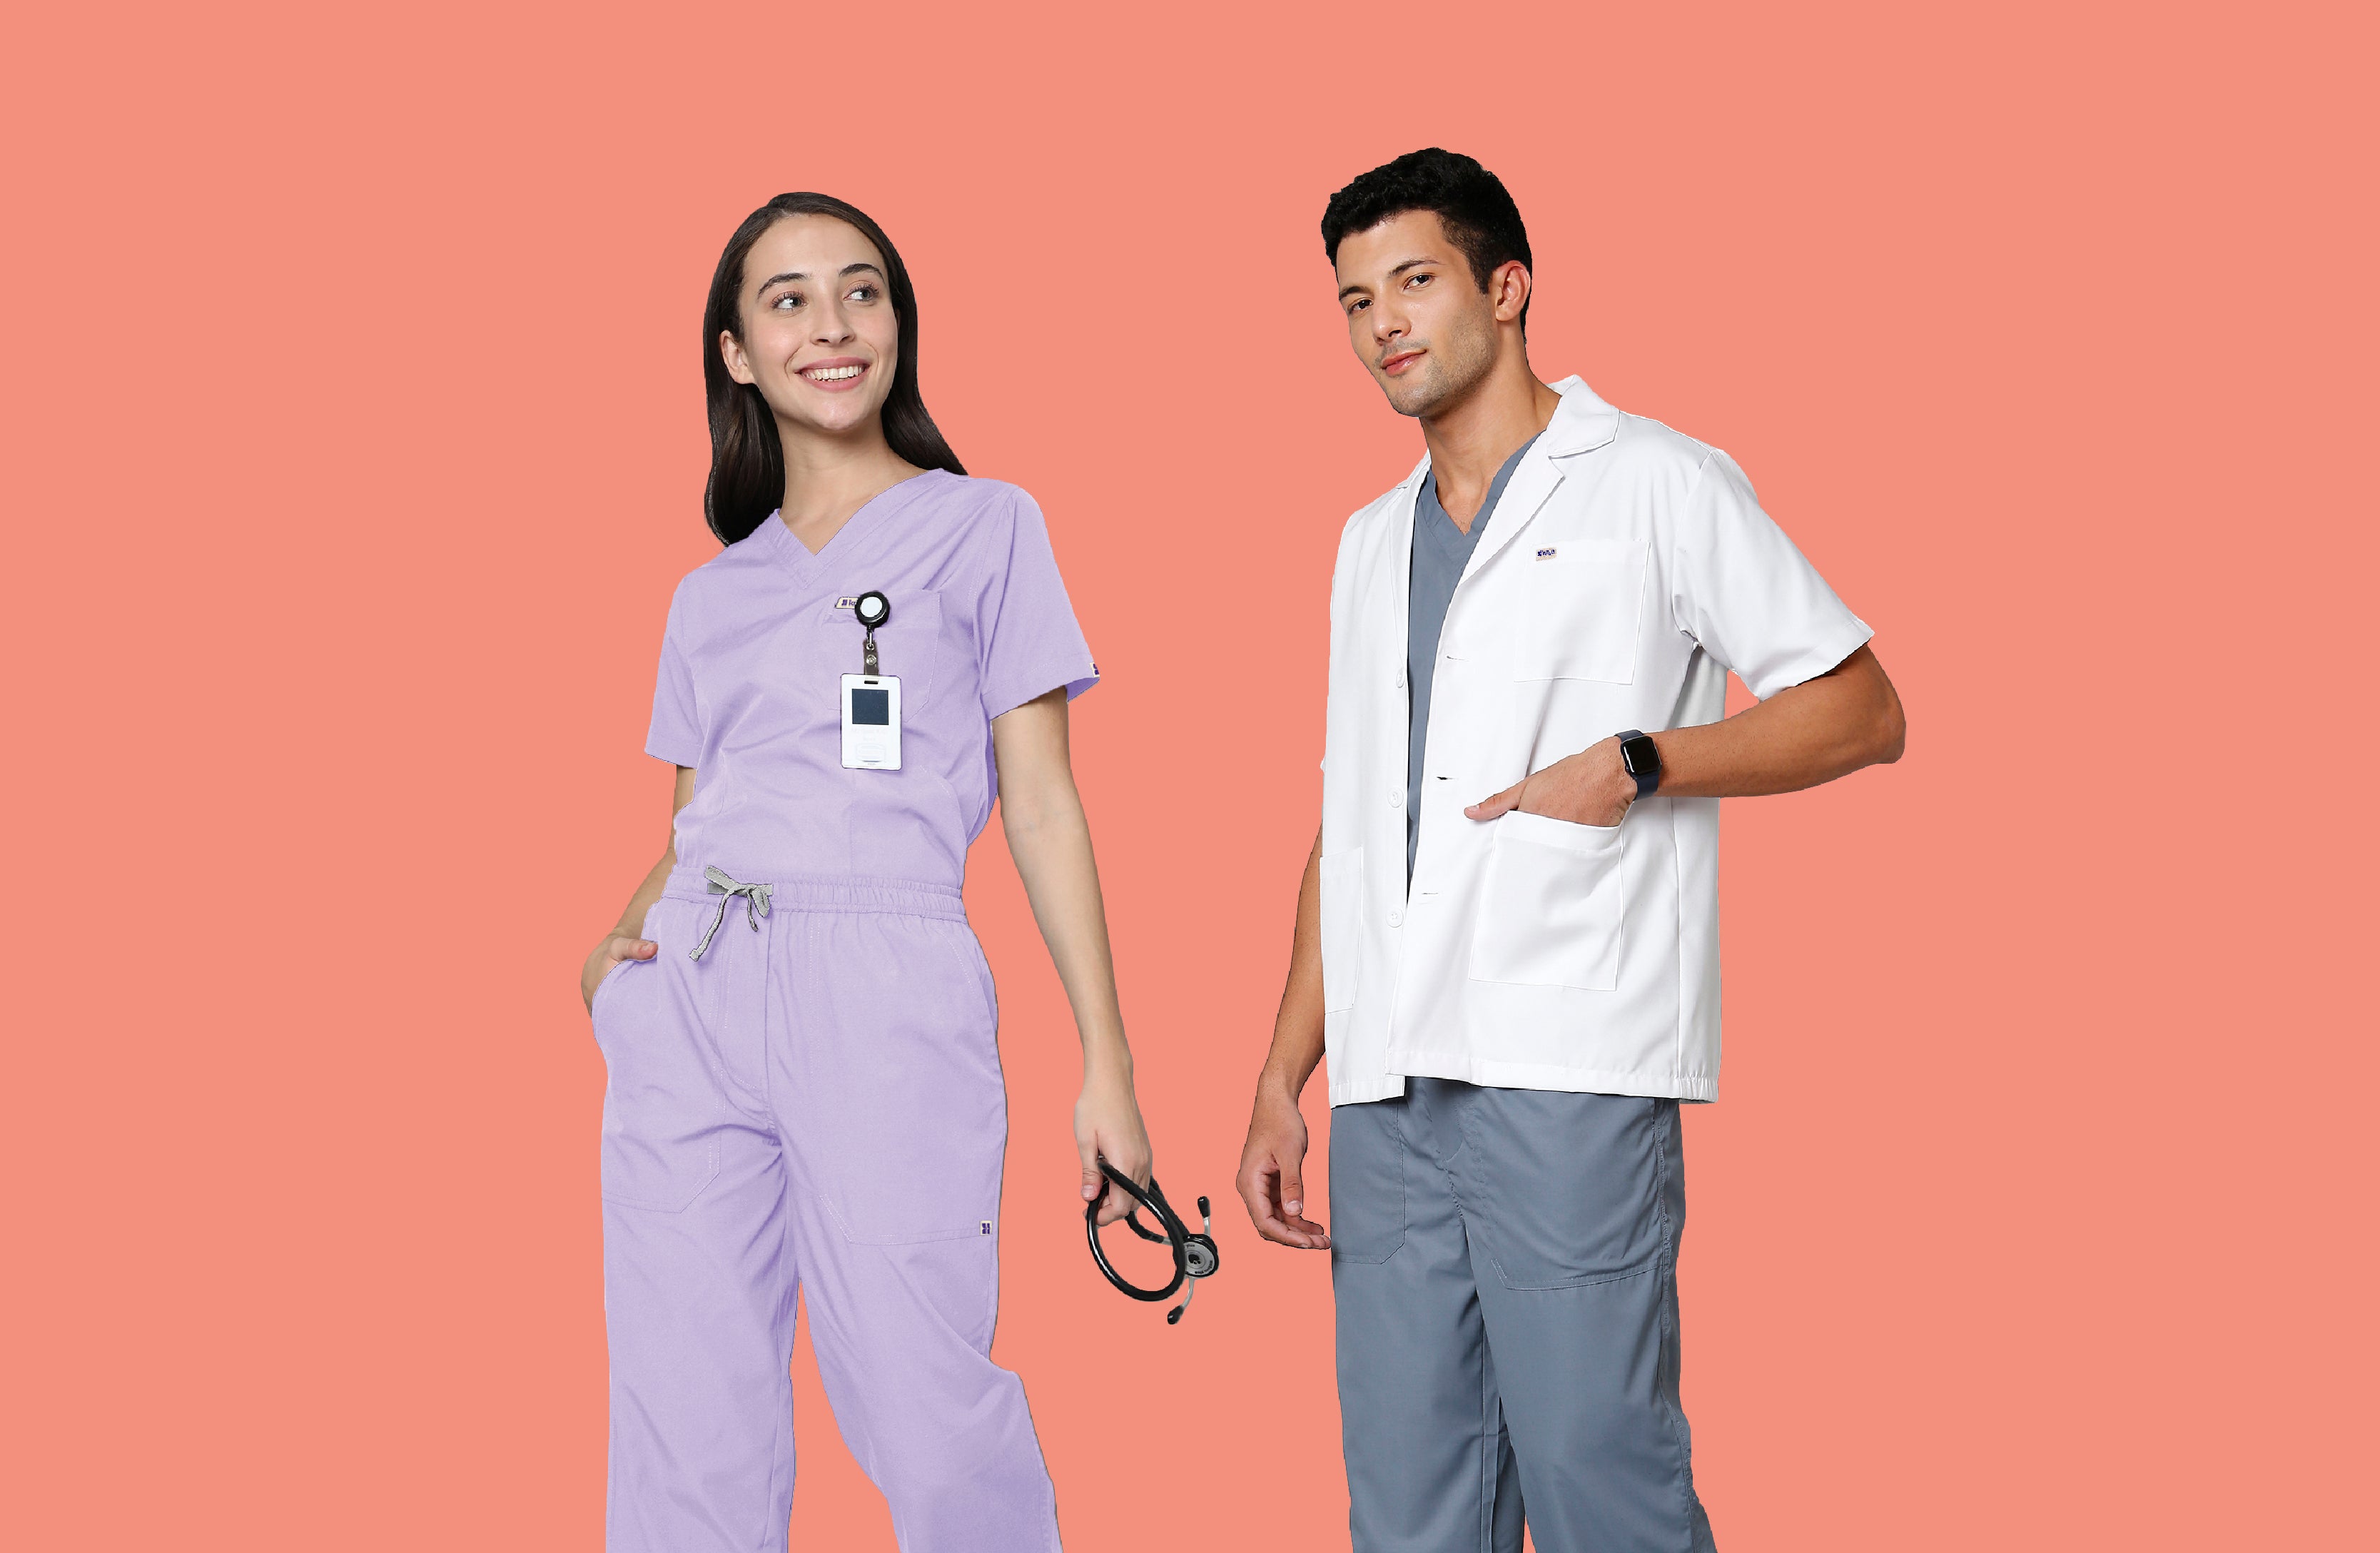 Best Gifts for Medical Professionals To Make Their Workday Easier 800x522 a0dcb089 7e6e 4bf9 aee3 16496d7c8d2c